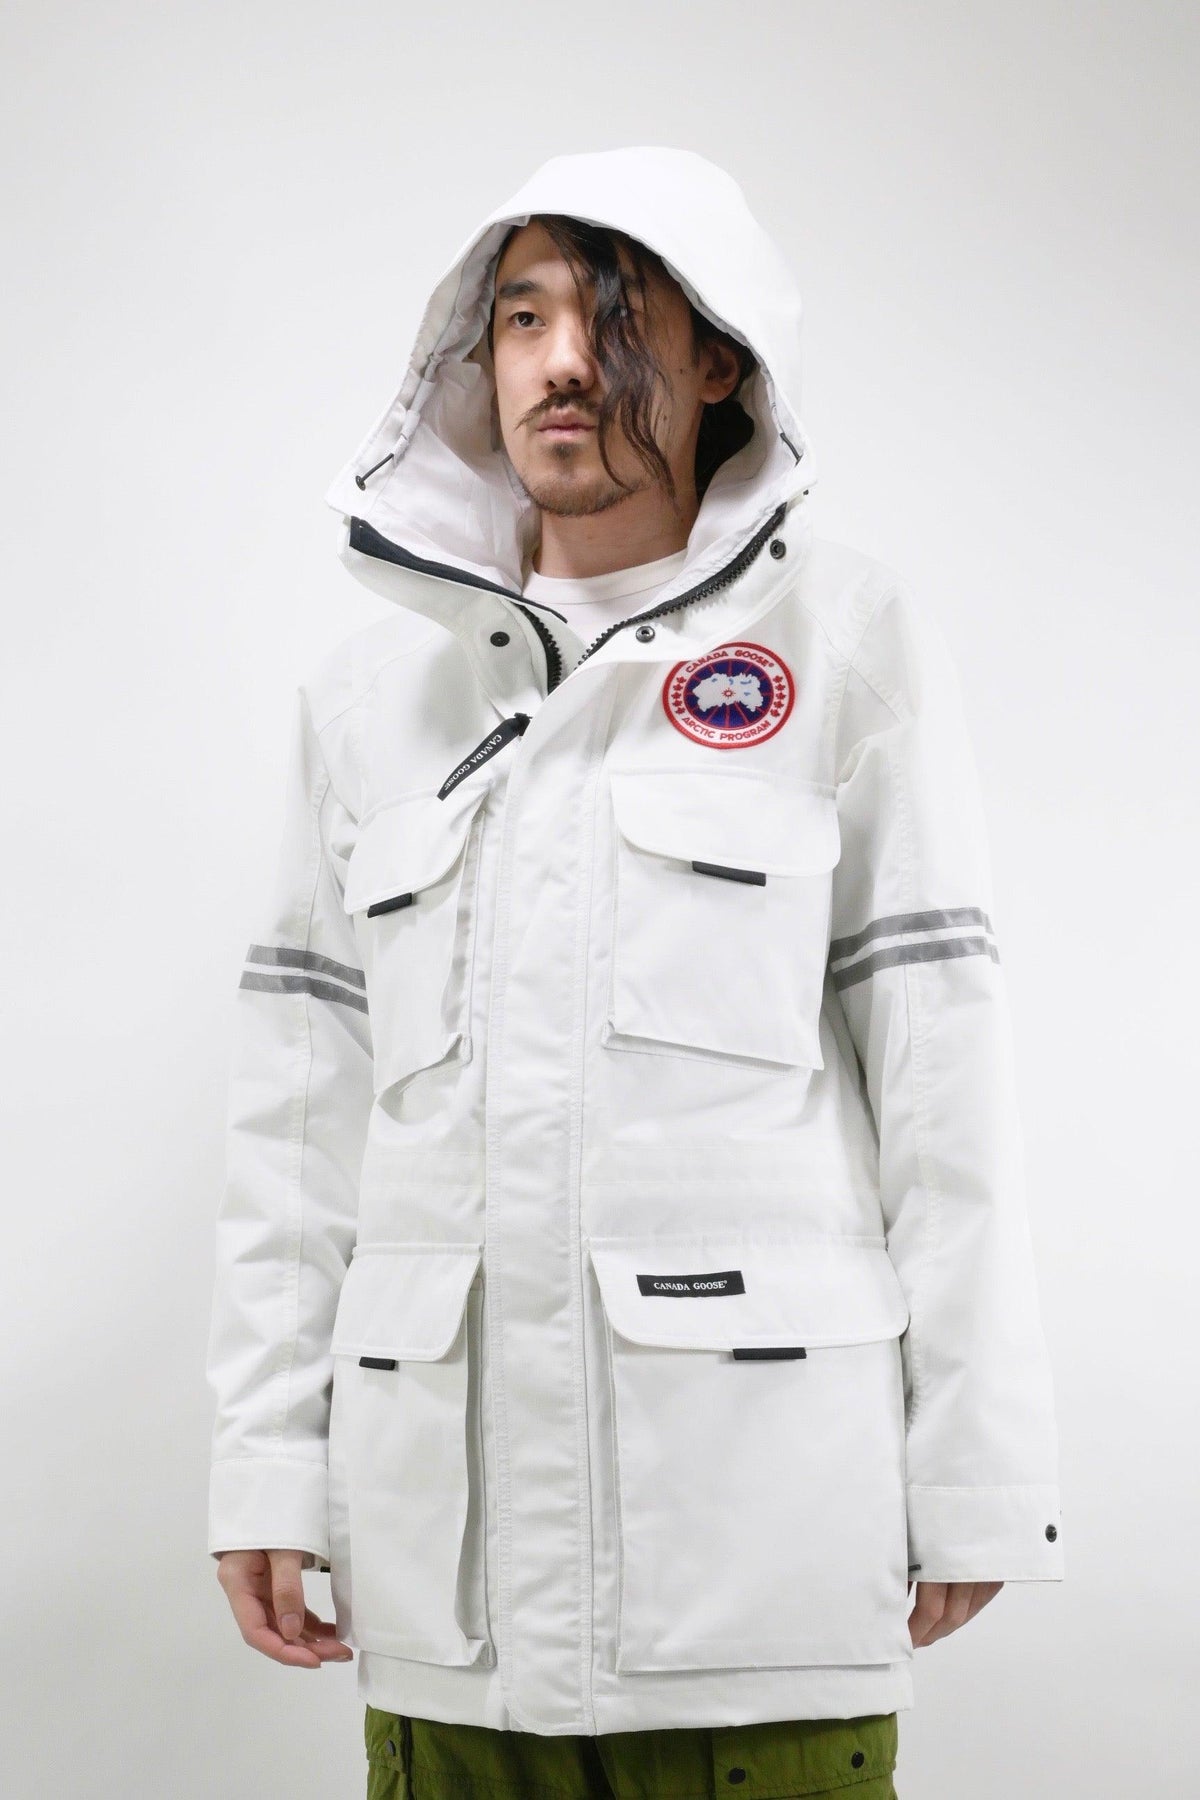 Canada Goose Mens Wind Jacket Science Research - North Star White - Due West